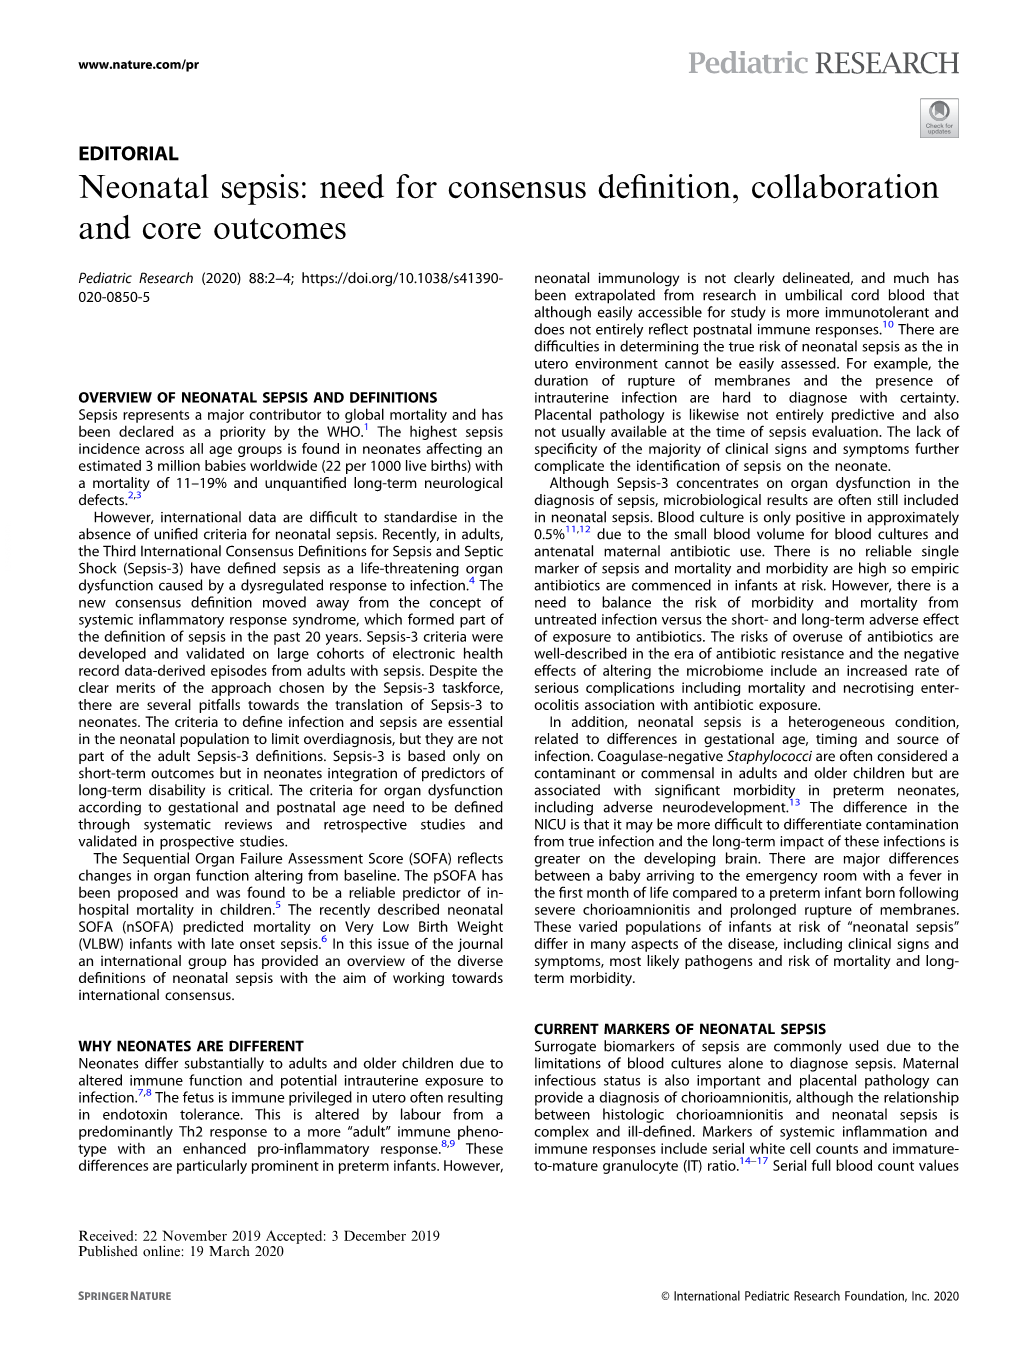 Neonatal Sepsis: Need for Consensus Definition, Collaboration and Core Outcomes